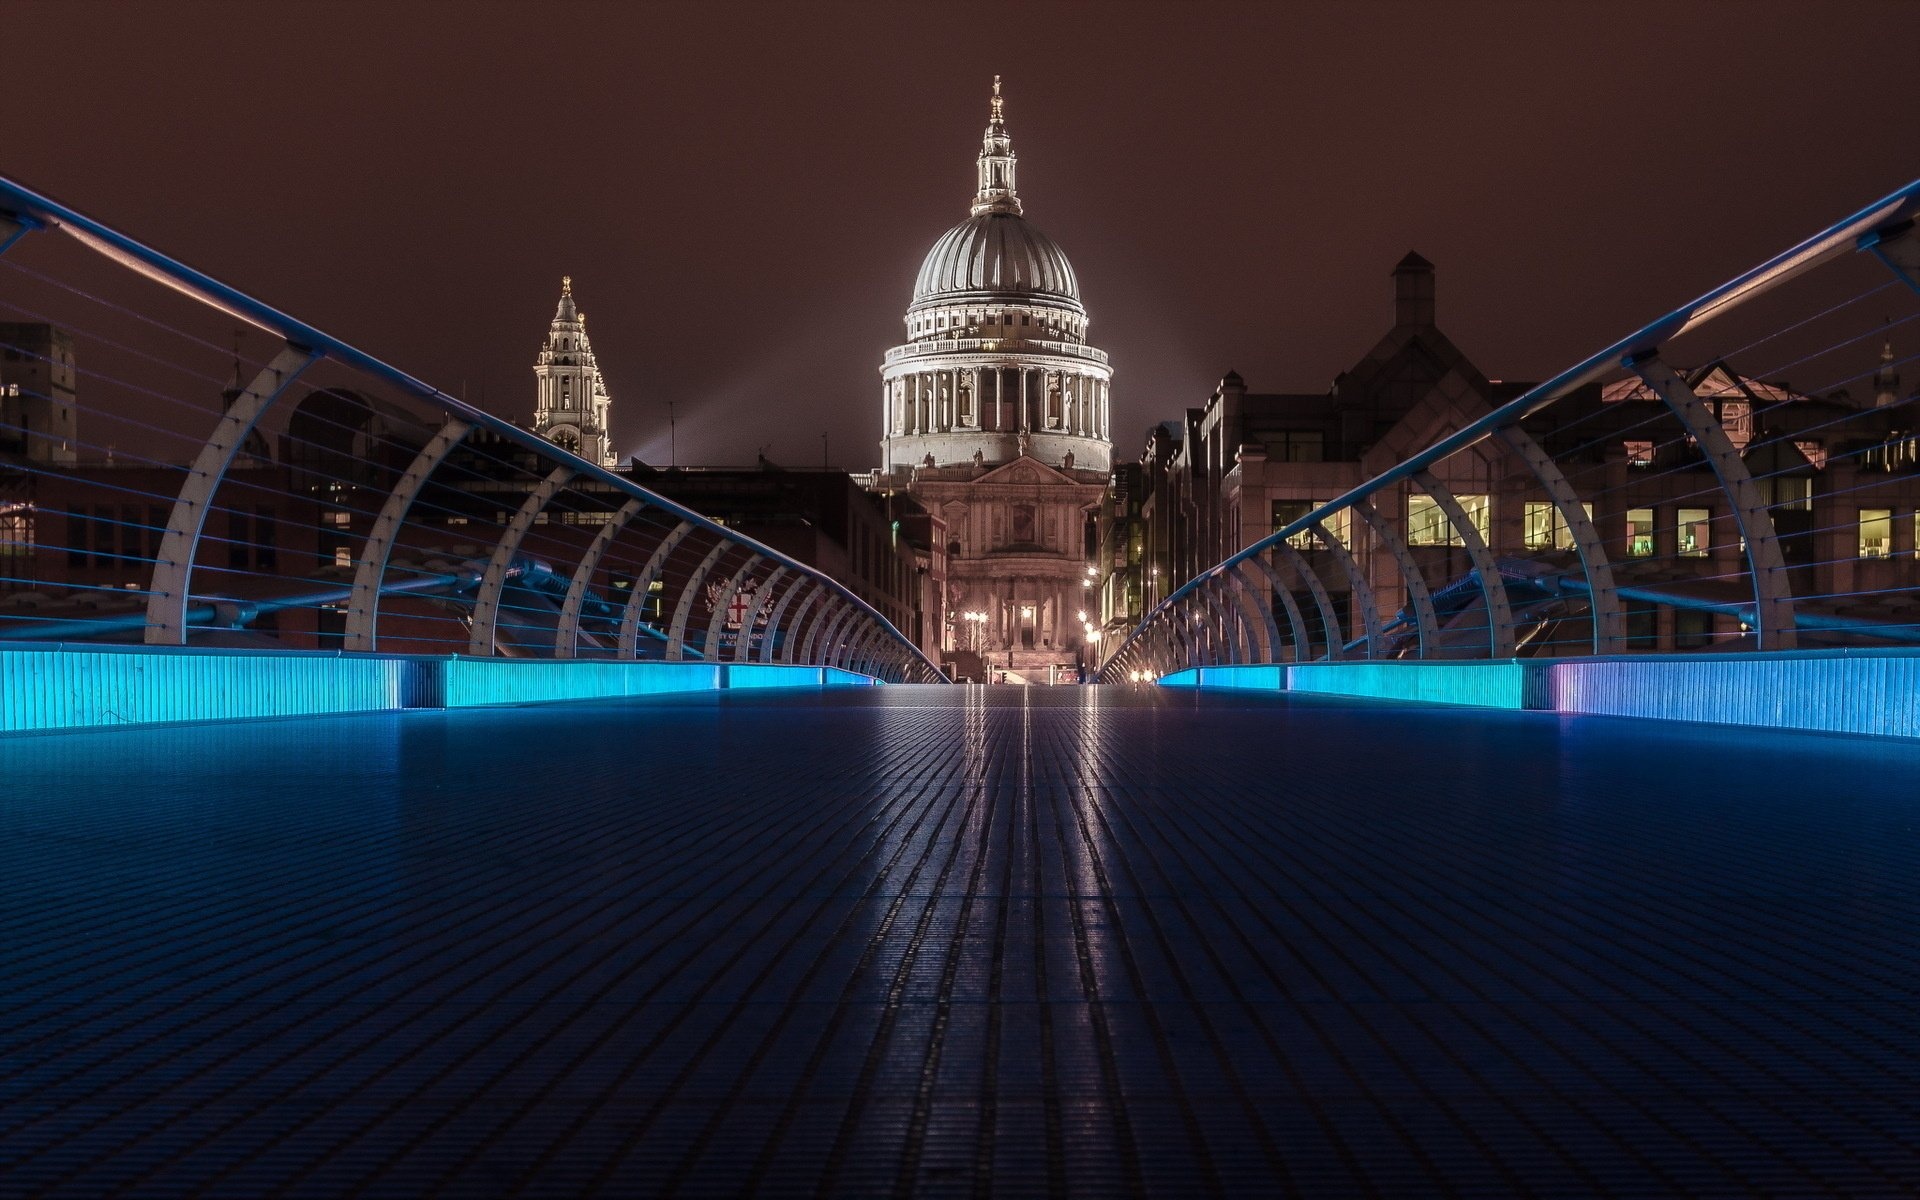 St. Paul's Cathedral, Stunning wallpapers, Breathtaking imagery, Iconic landmark, 1920x1200 HD Desktop